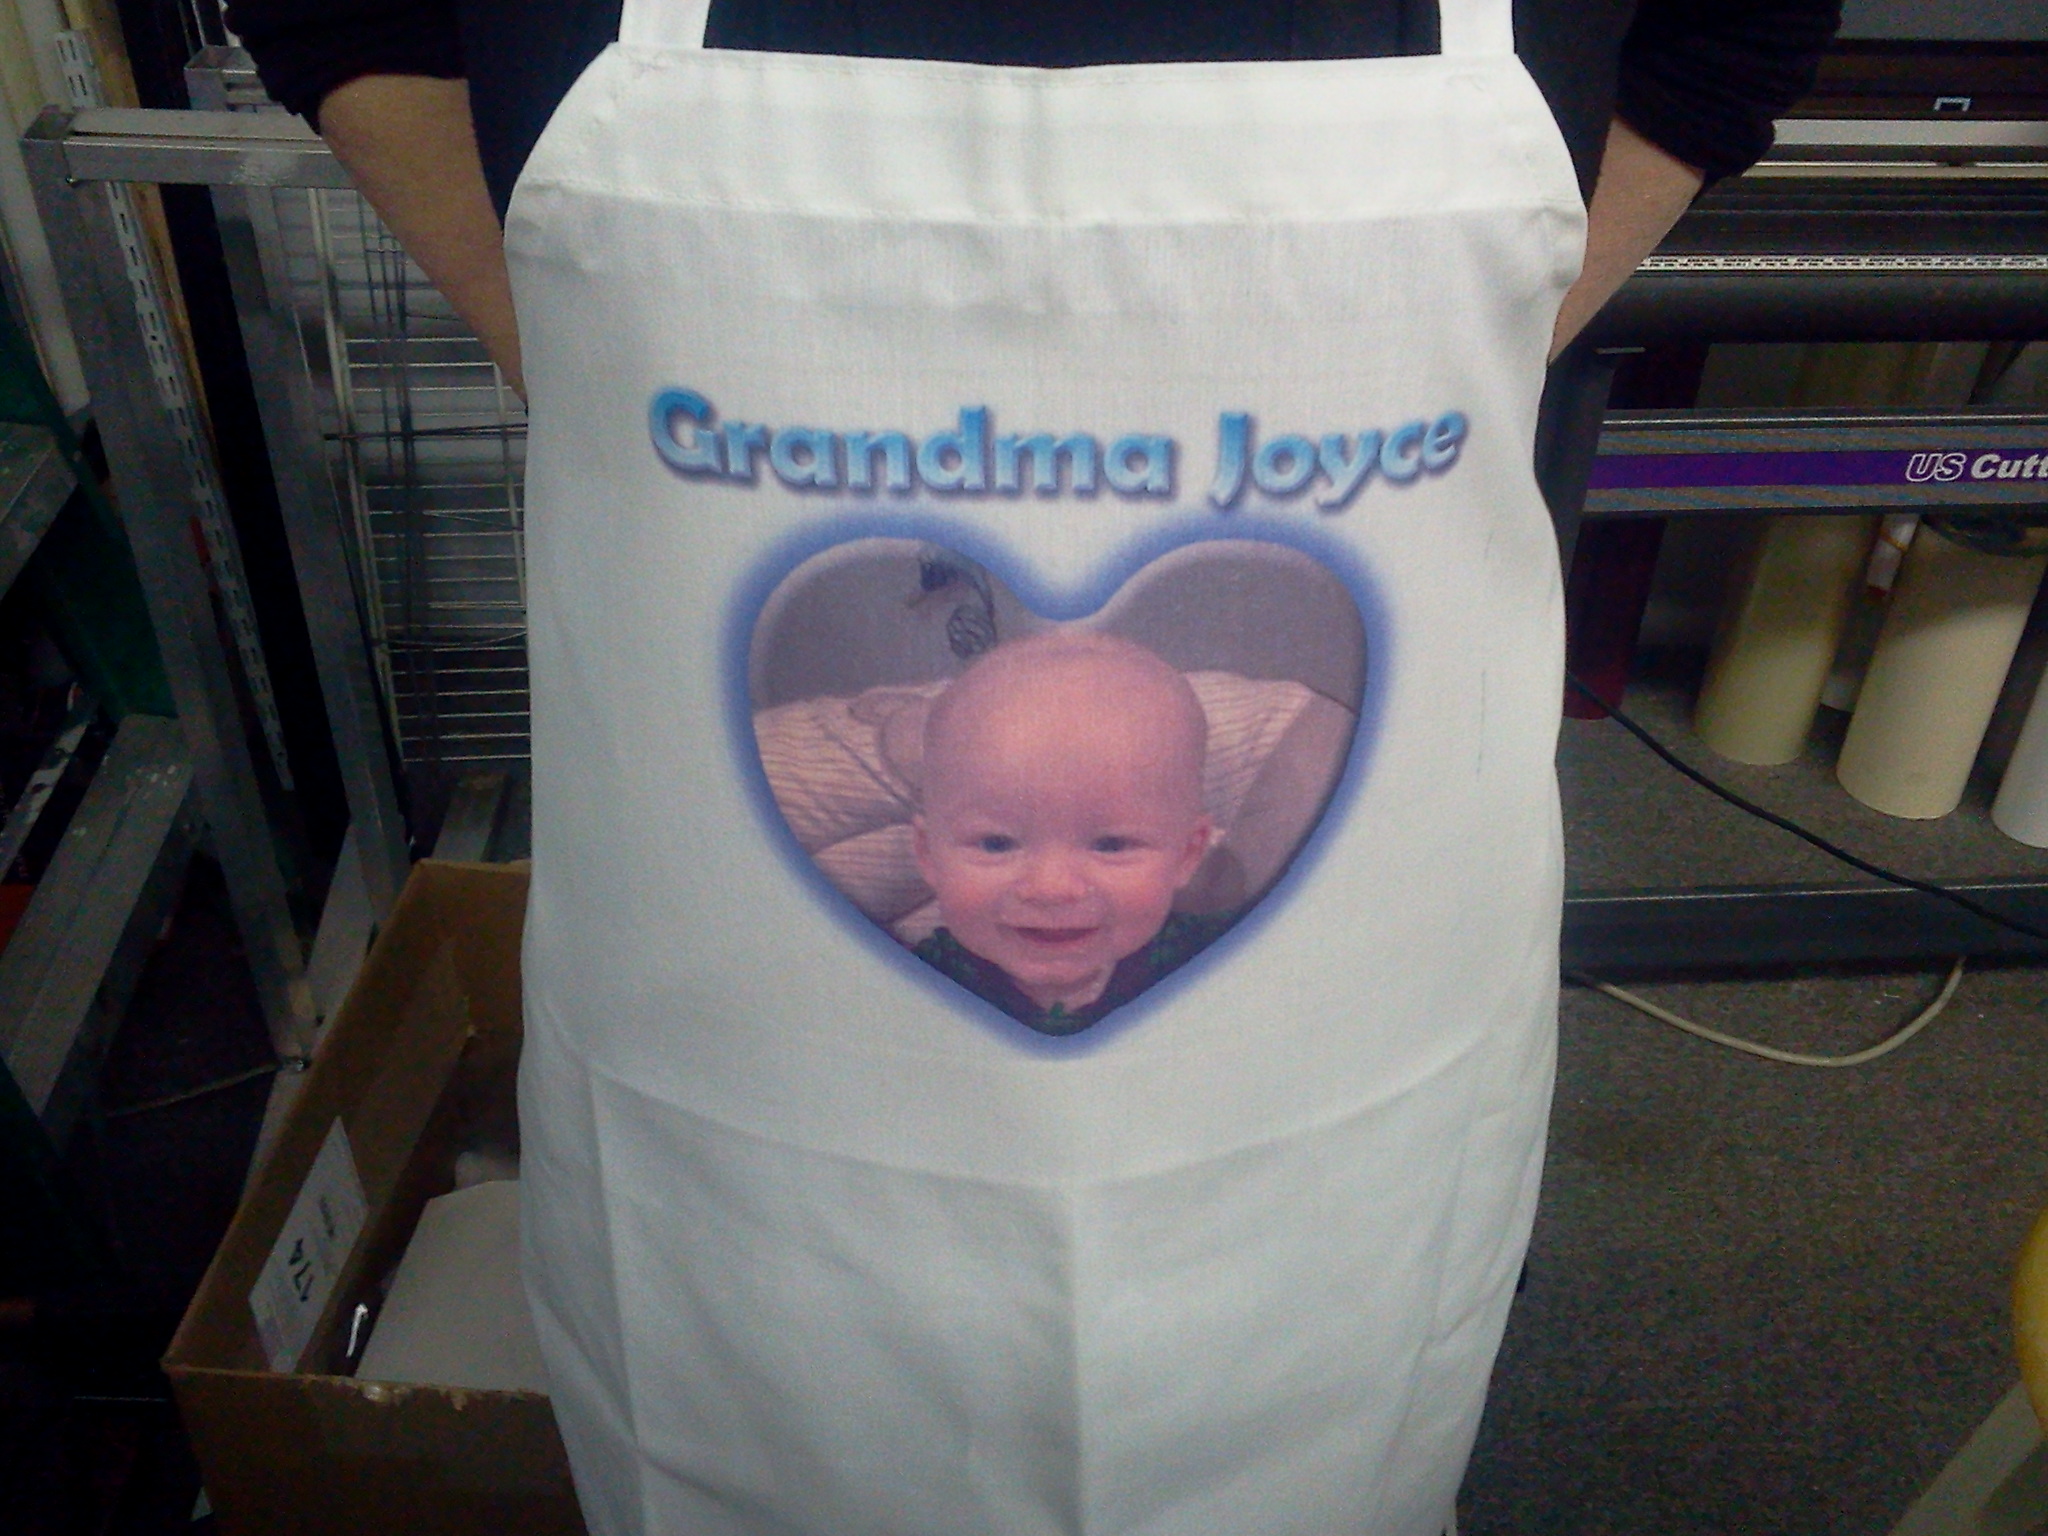 Image Gift made with sublimation printing